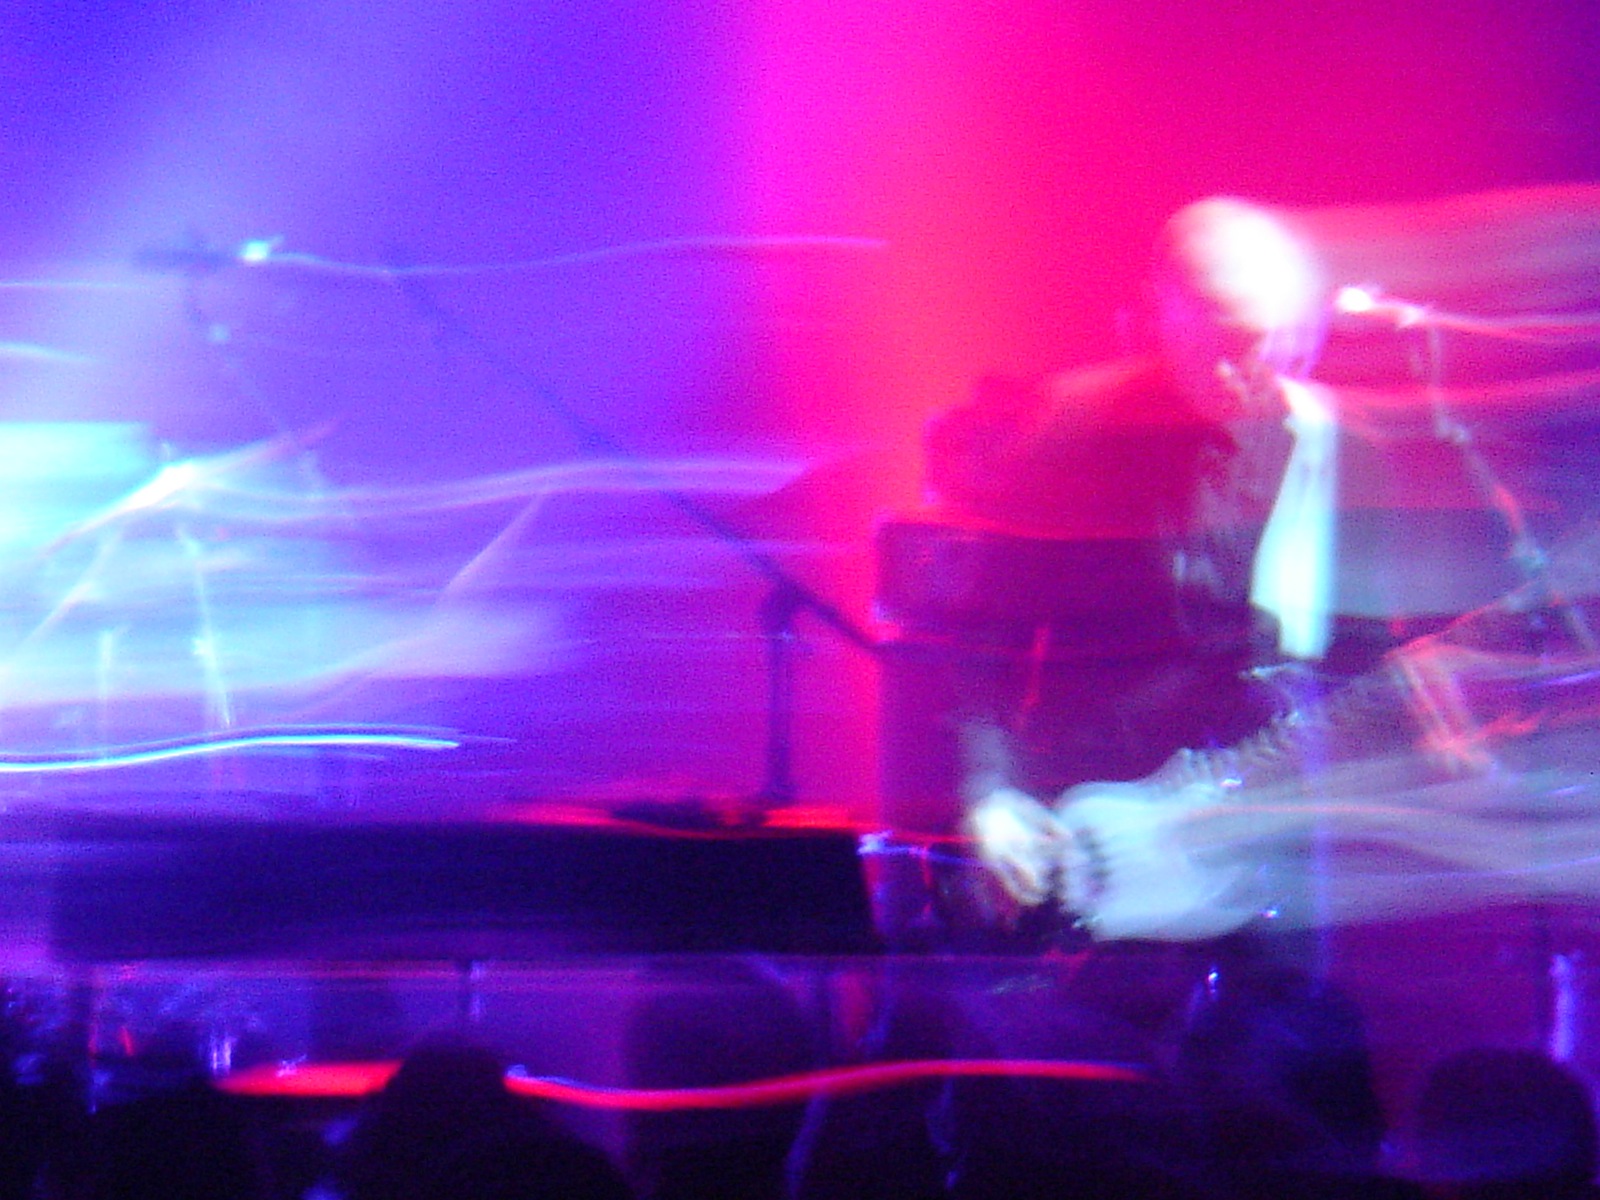 a blurry image of people on a concert stage playing guitars